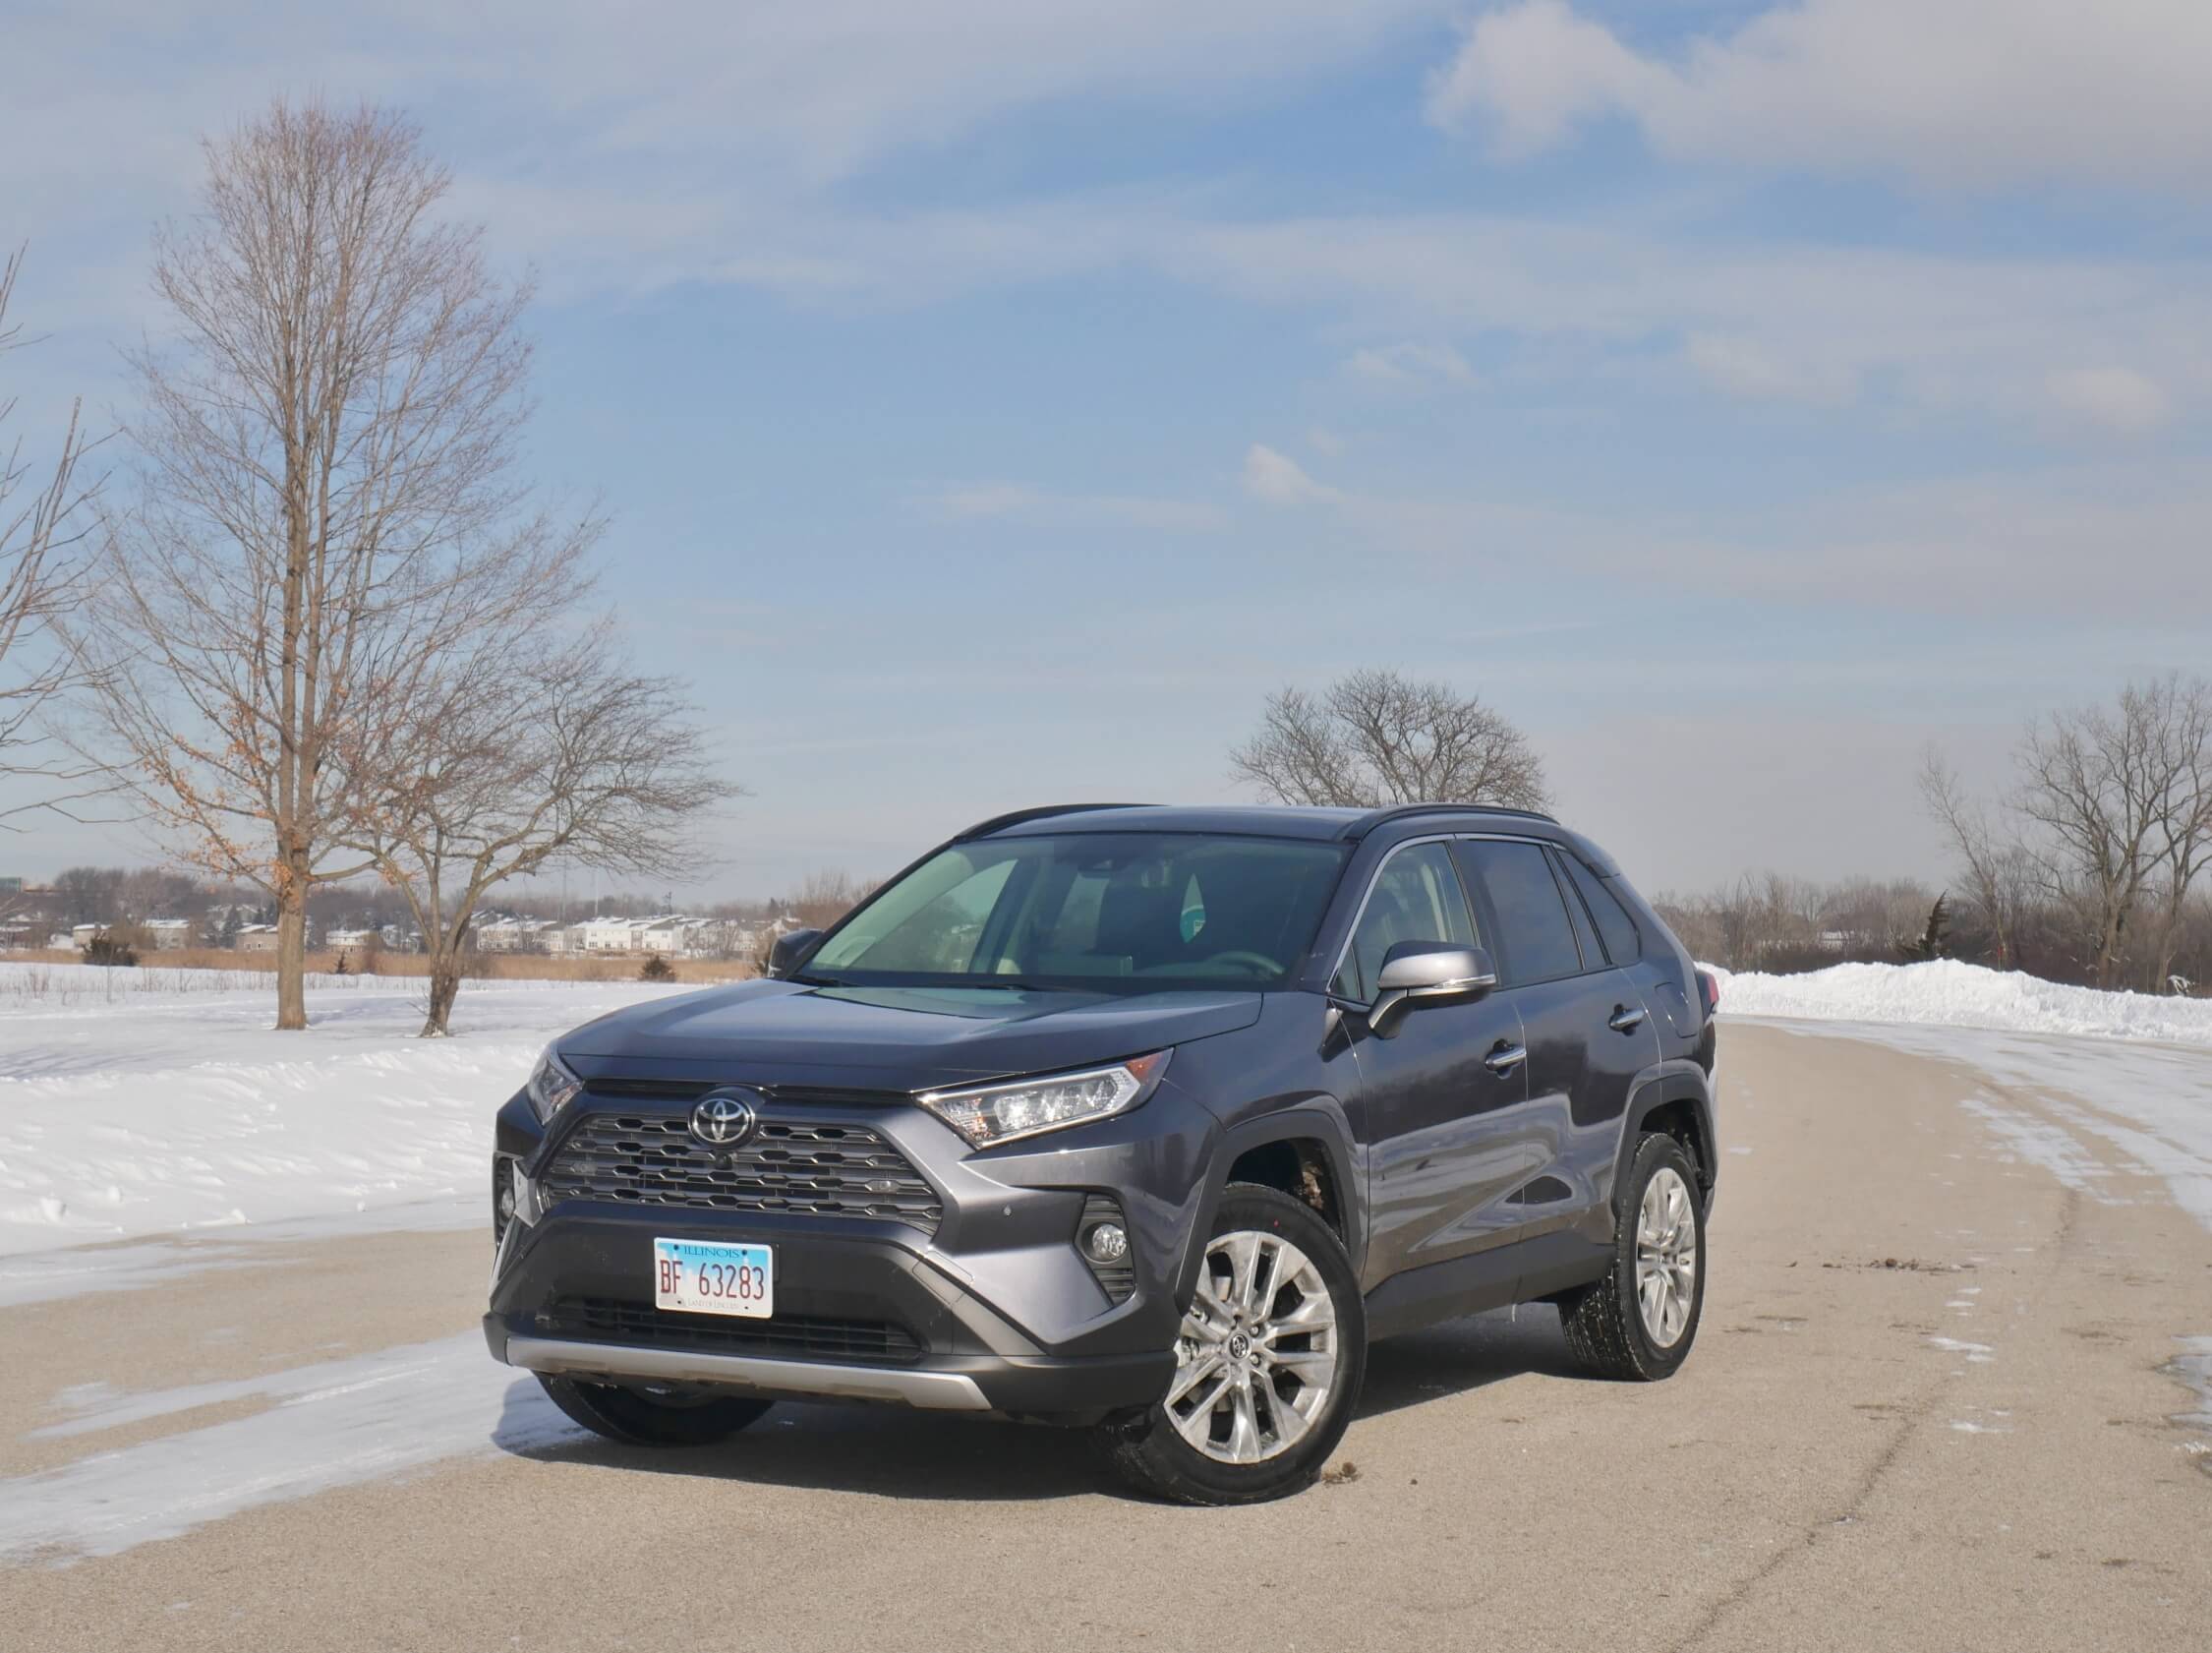 2019 Toyota RAV4 Limited AWD: New truck-like apparel and new platform for America's No. 1 selling non-truck derived passenger vehicle.